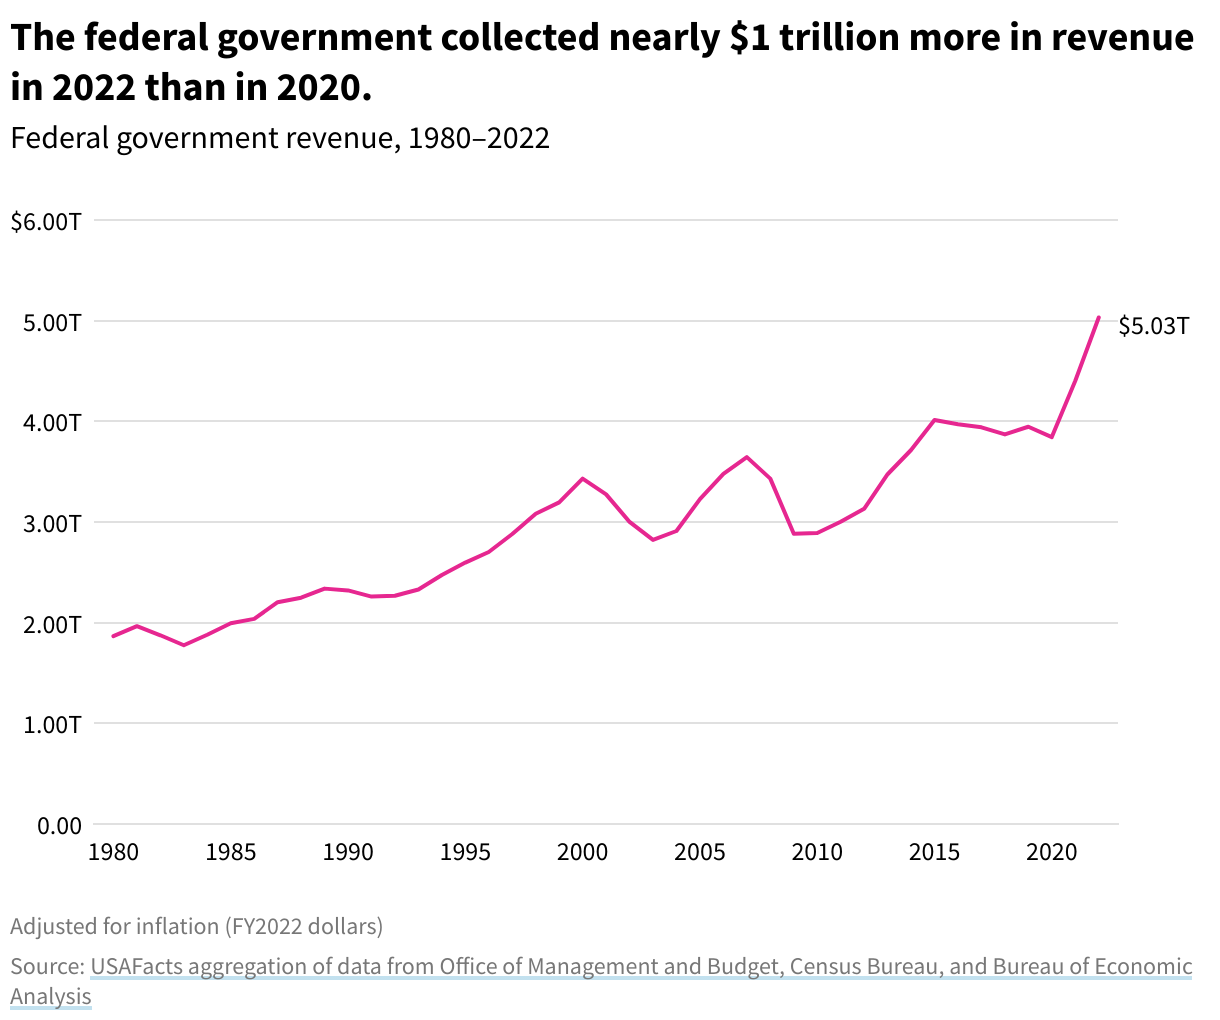 Line chart of federal government revenue from 1980 to 2022 with an upward trend. In 2022, the federal government collected $5.03 trillion in revenue.